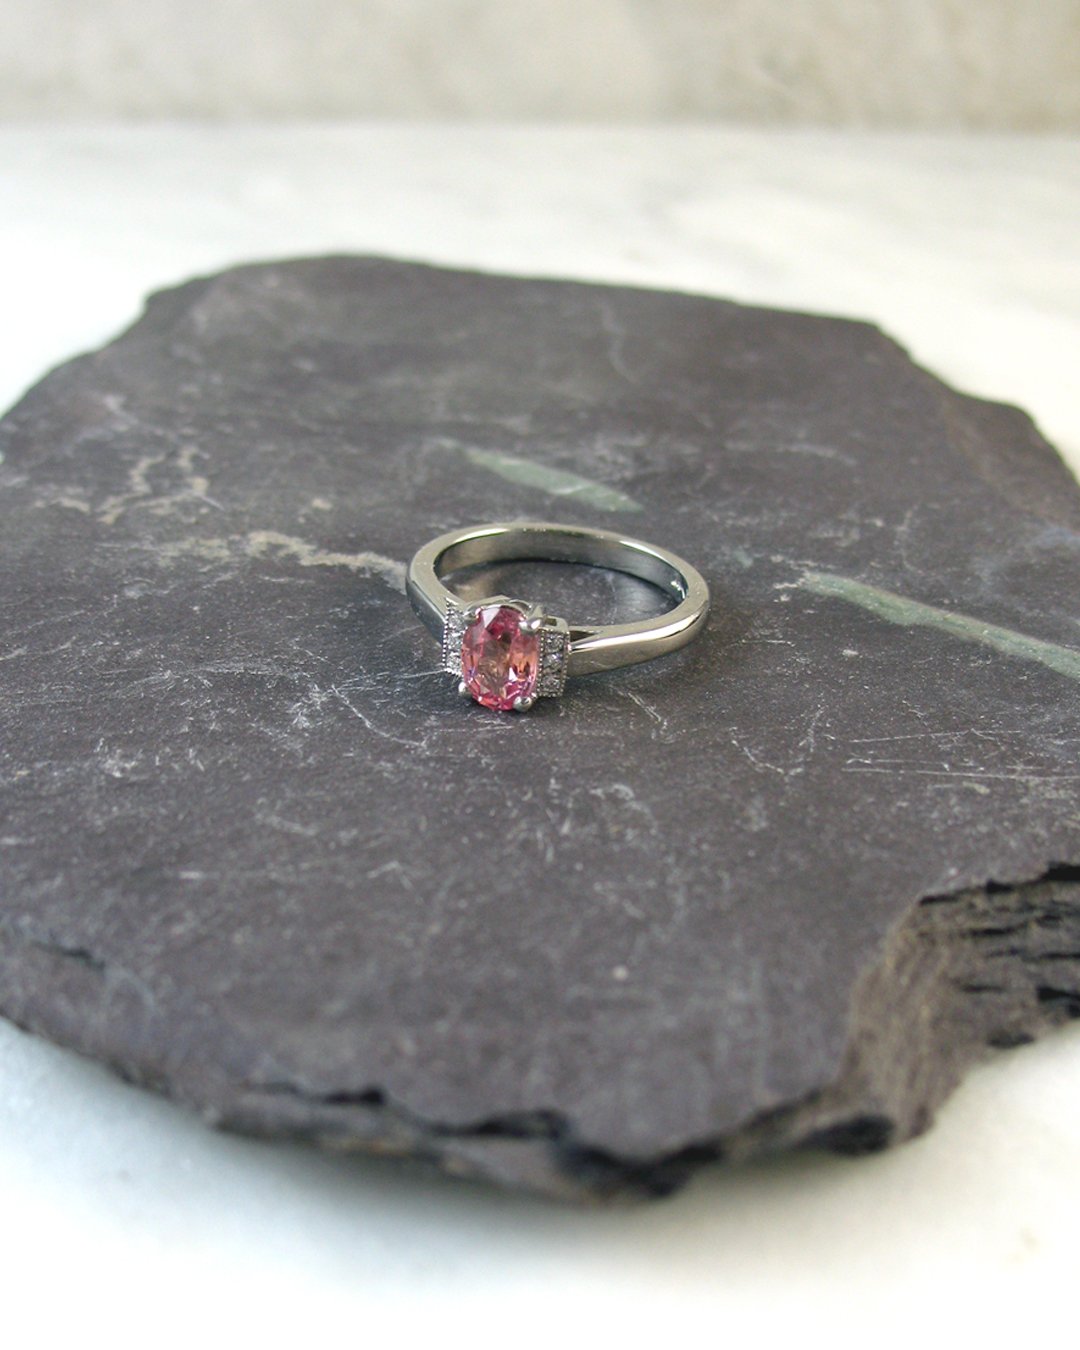 An exquisite Padparadscha sapphire engagement ring